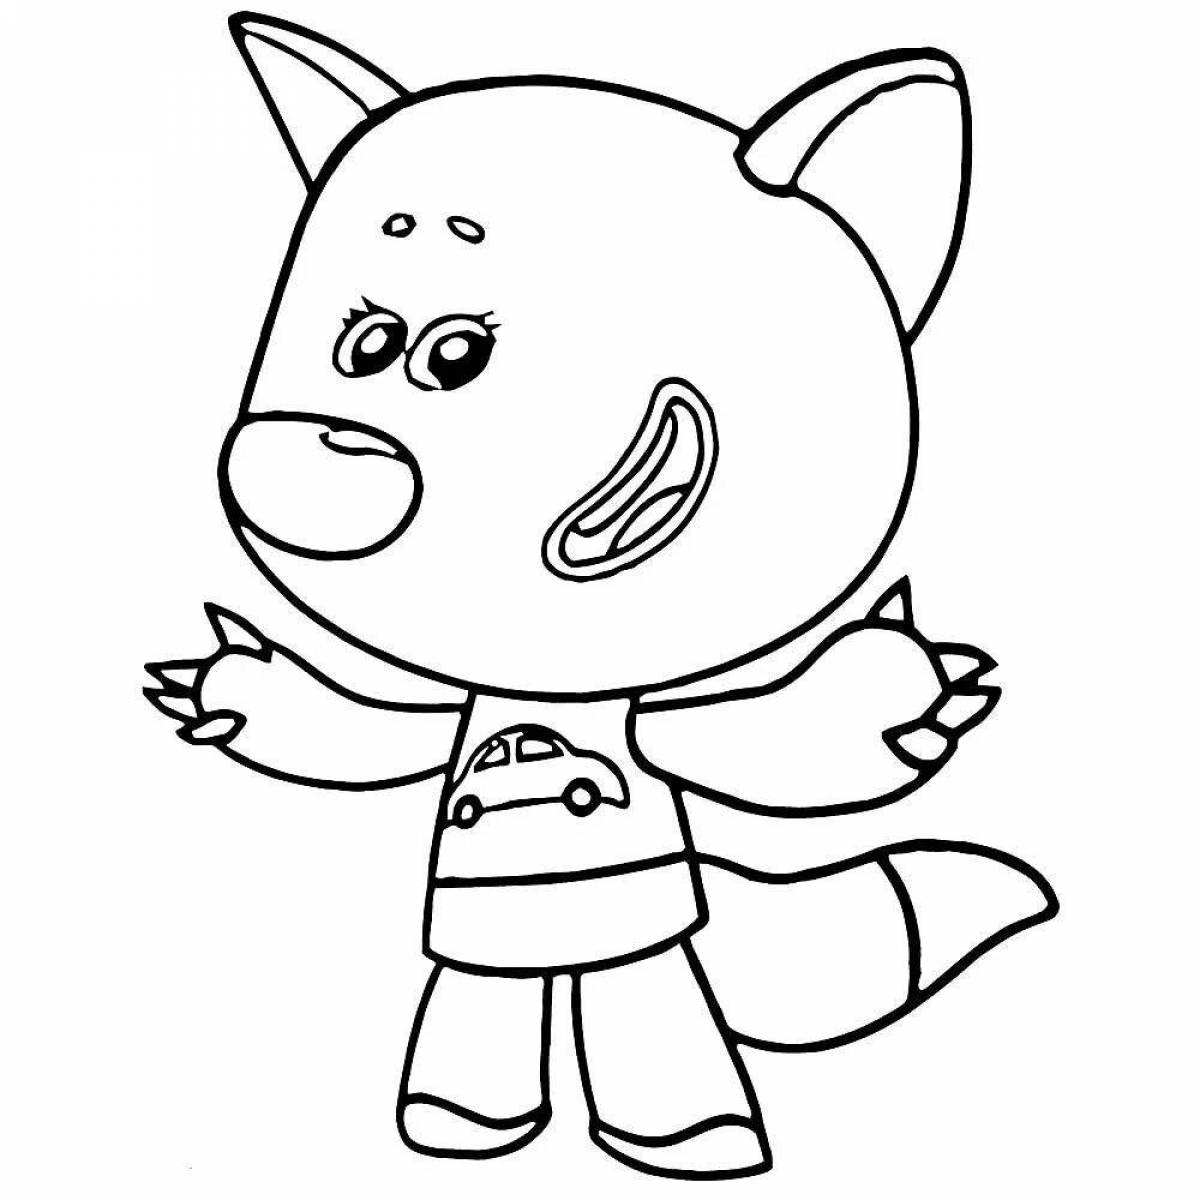 Color-frenzy coloring pages for boys